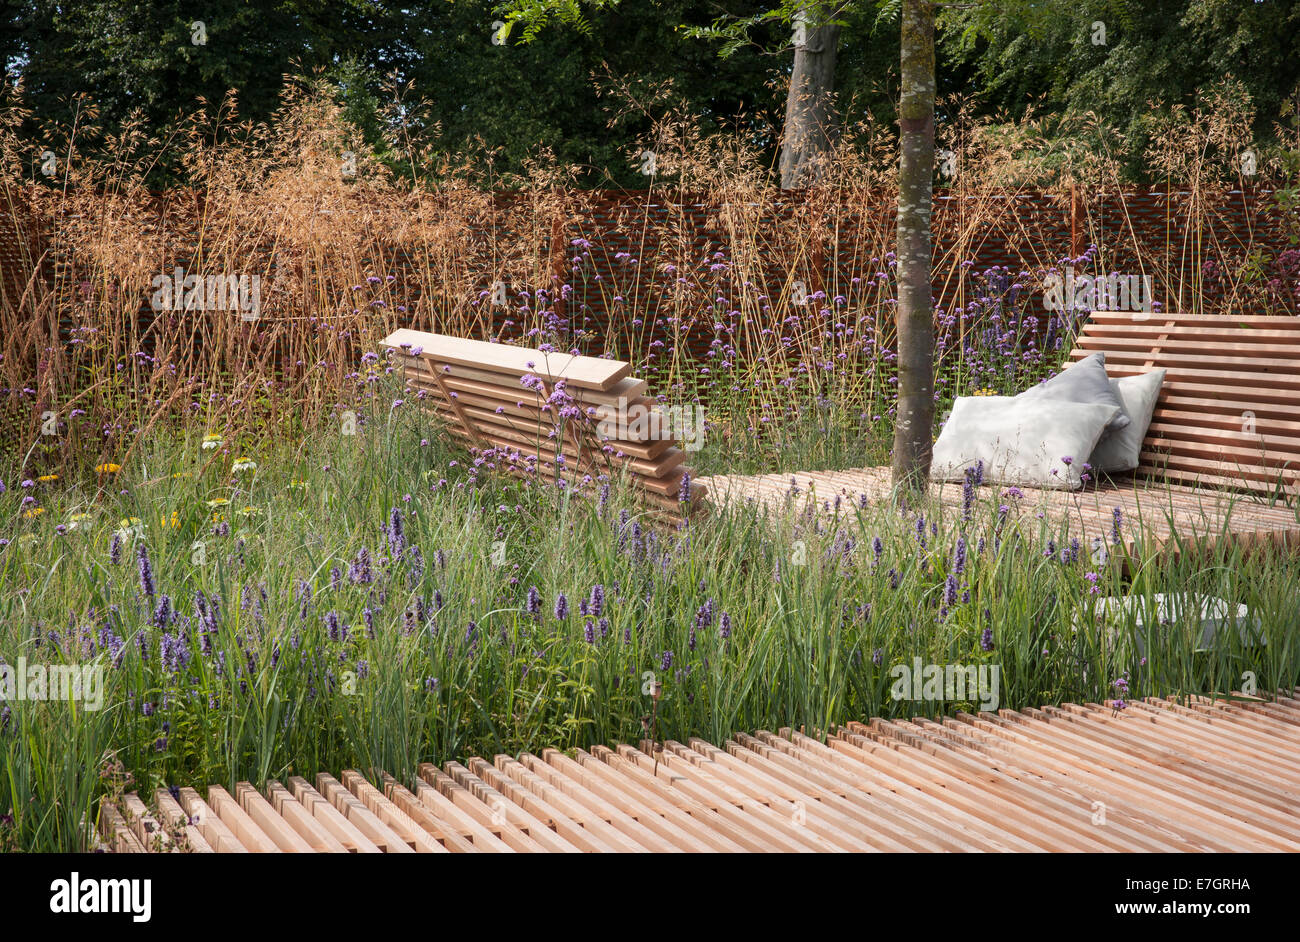 Stipa gigantea - Verbena bonariensis and grasses in a small garden - wooden deck area seating on decking at Tatton Park RHS flower Stock Photo